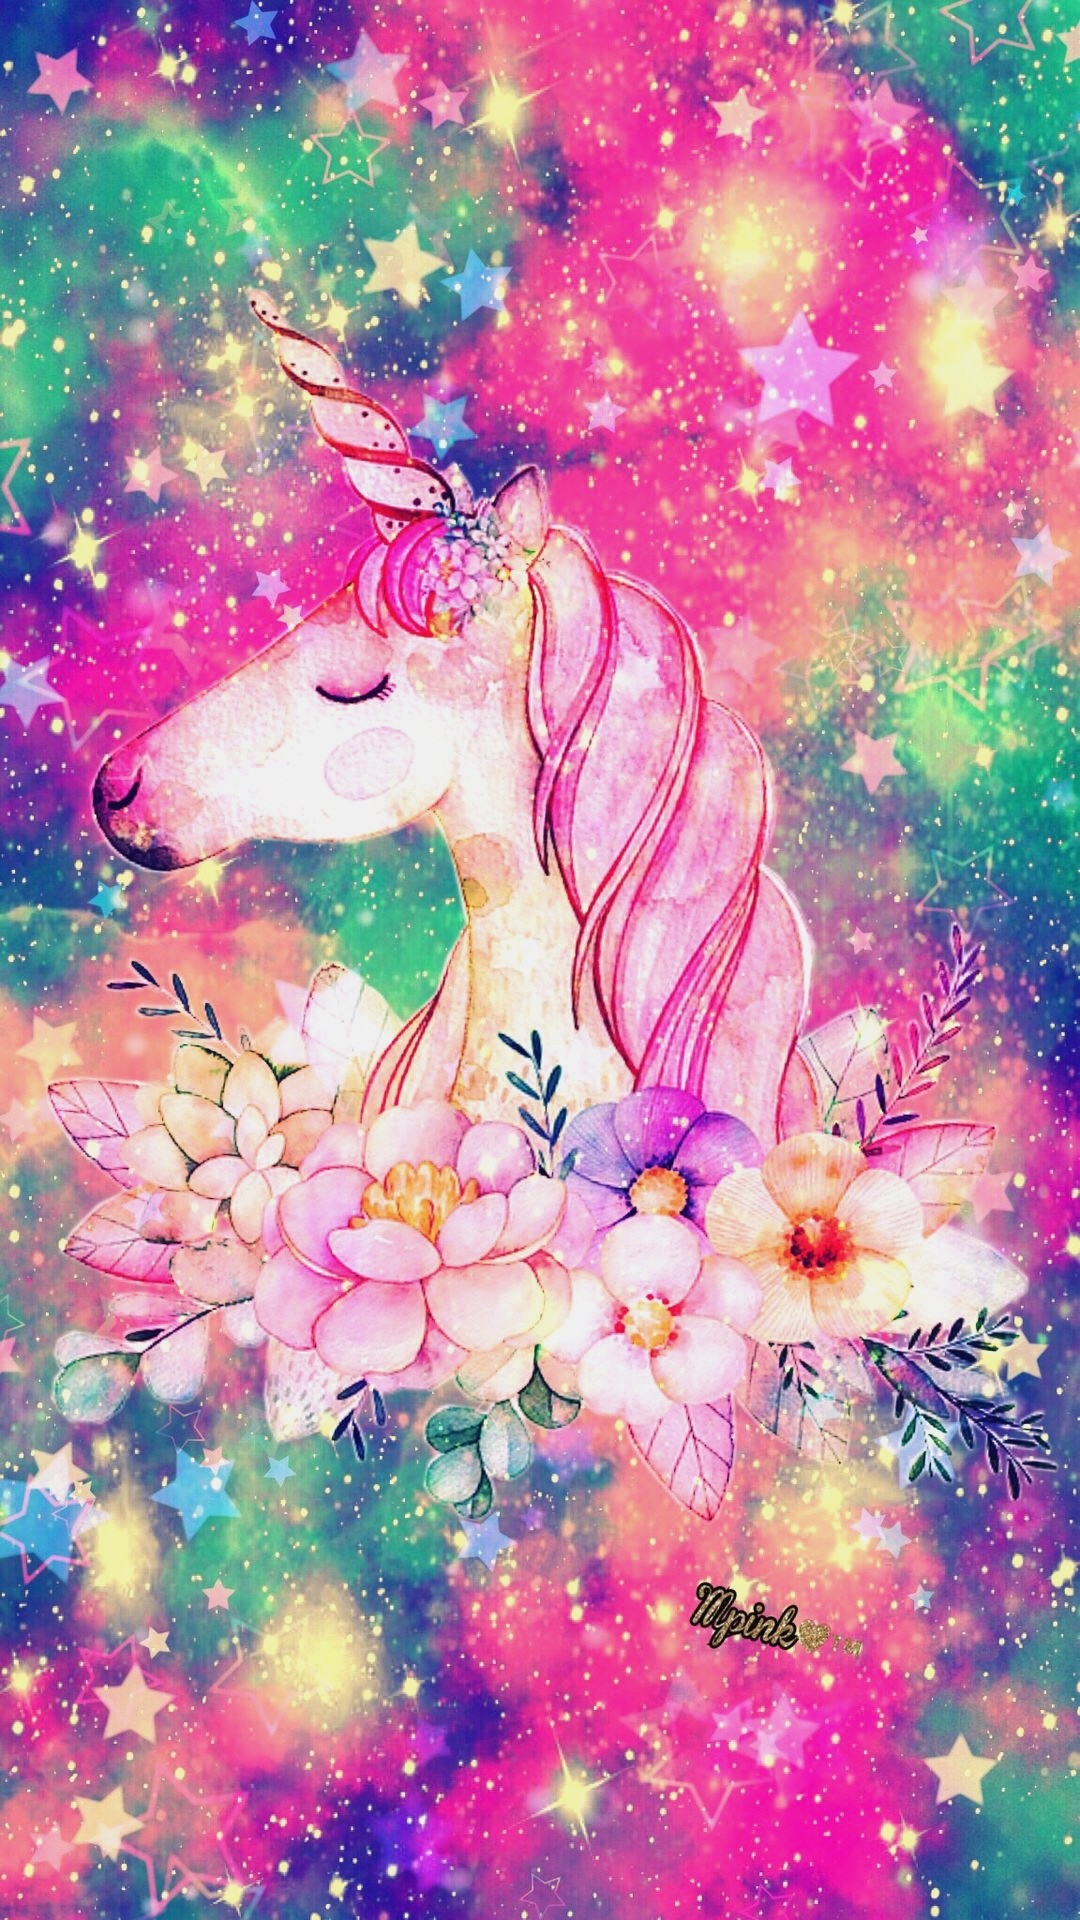 glitter wallpaper for girls,unicorn,fictional character,pink,mythical creature,illustration